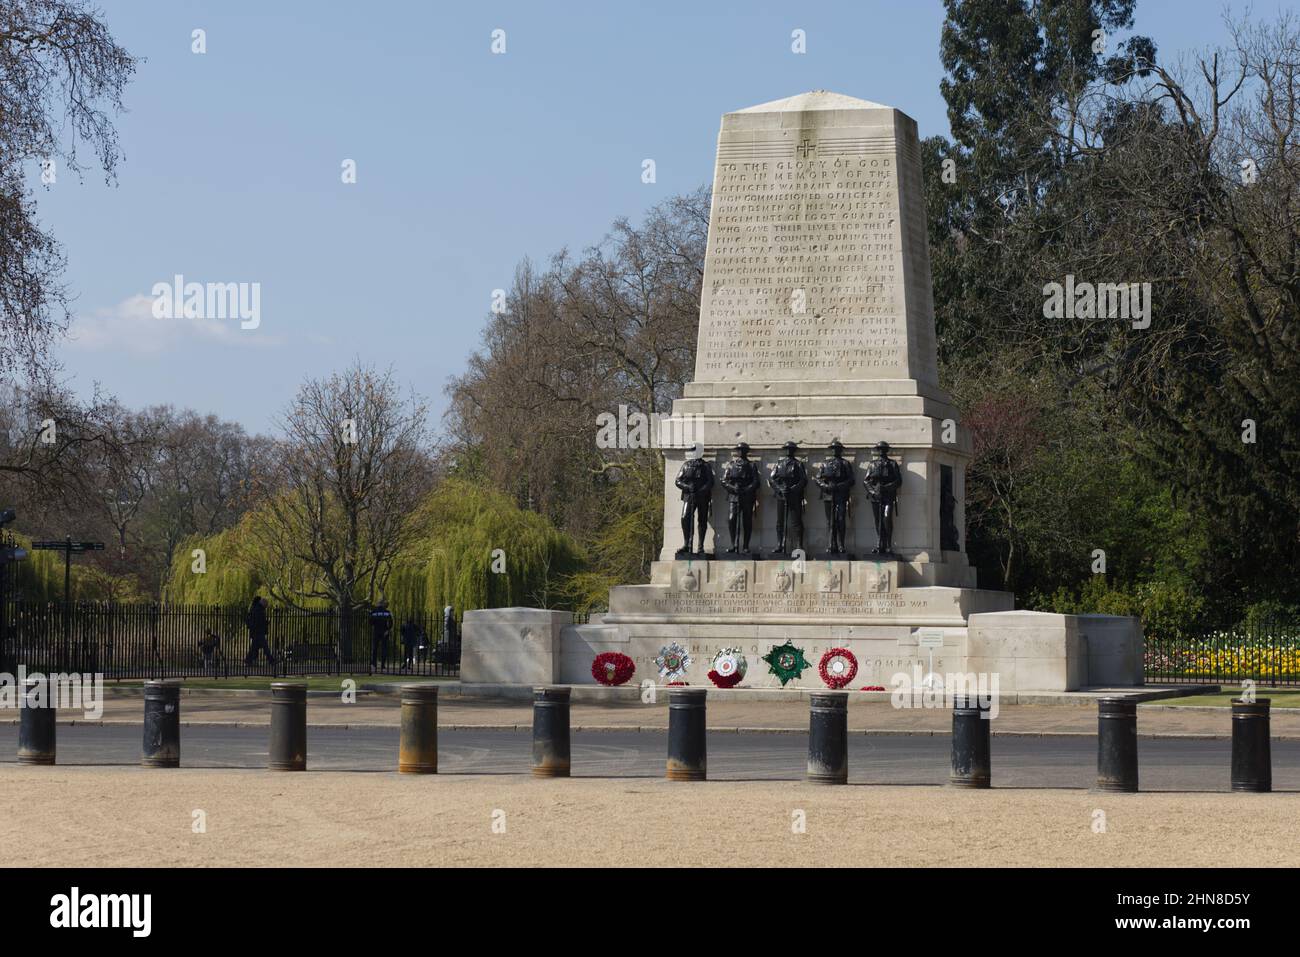 Guards Division War Memorial, west side of Horse Guards Road, Horse Guards Parade in London, commemorates the war dead from the Guards Division Stock Photo